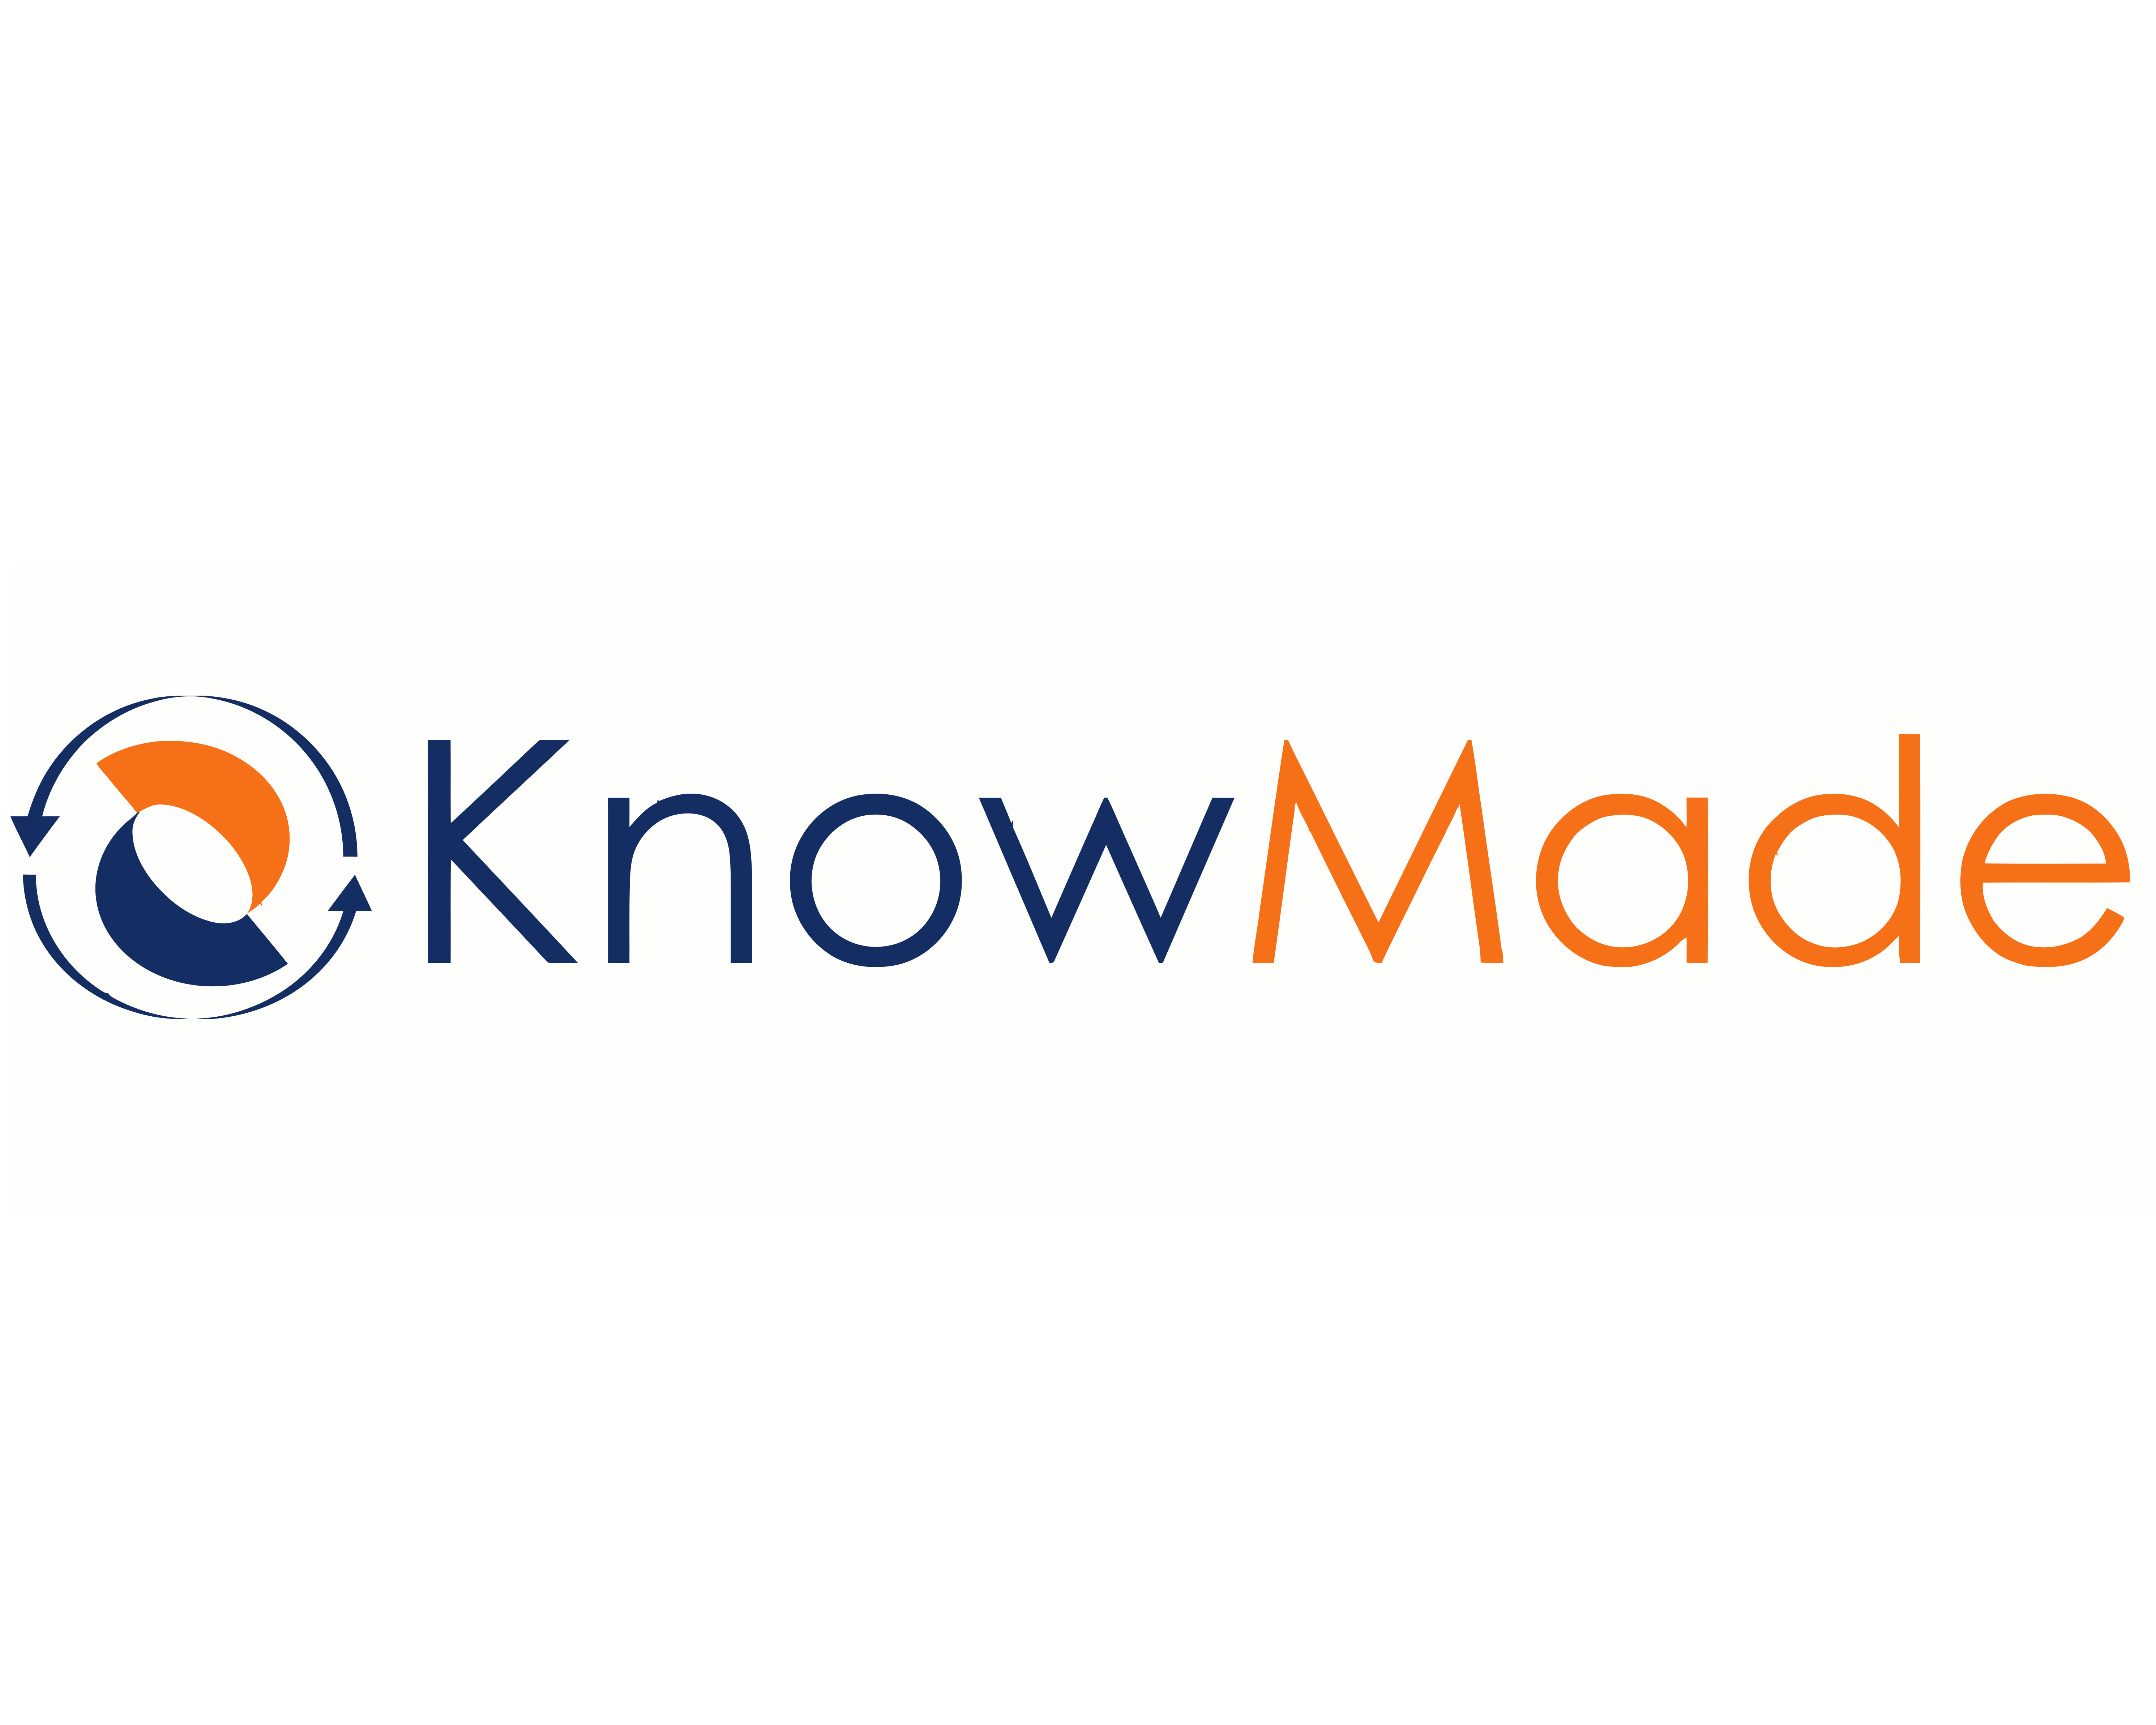 Knowmade